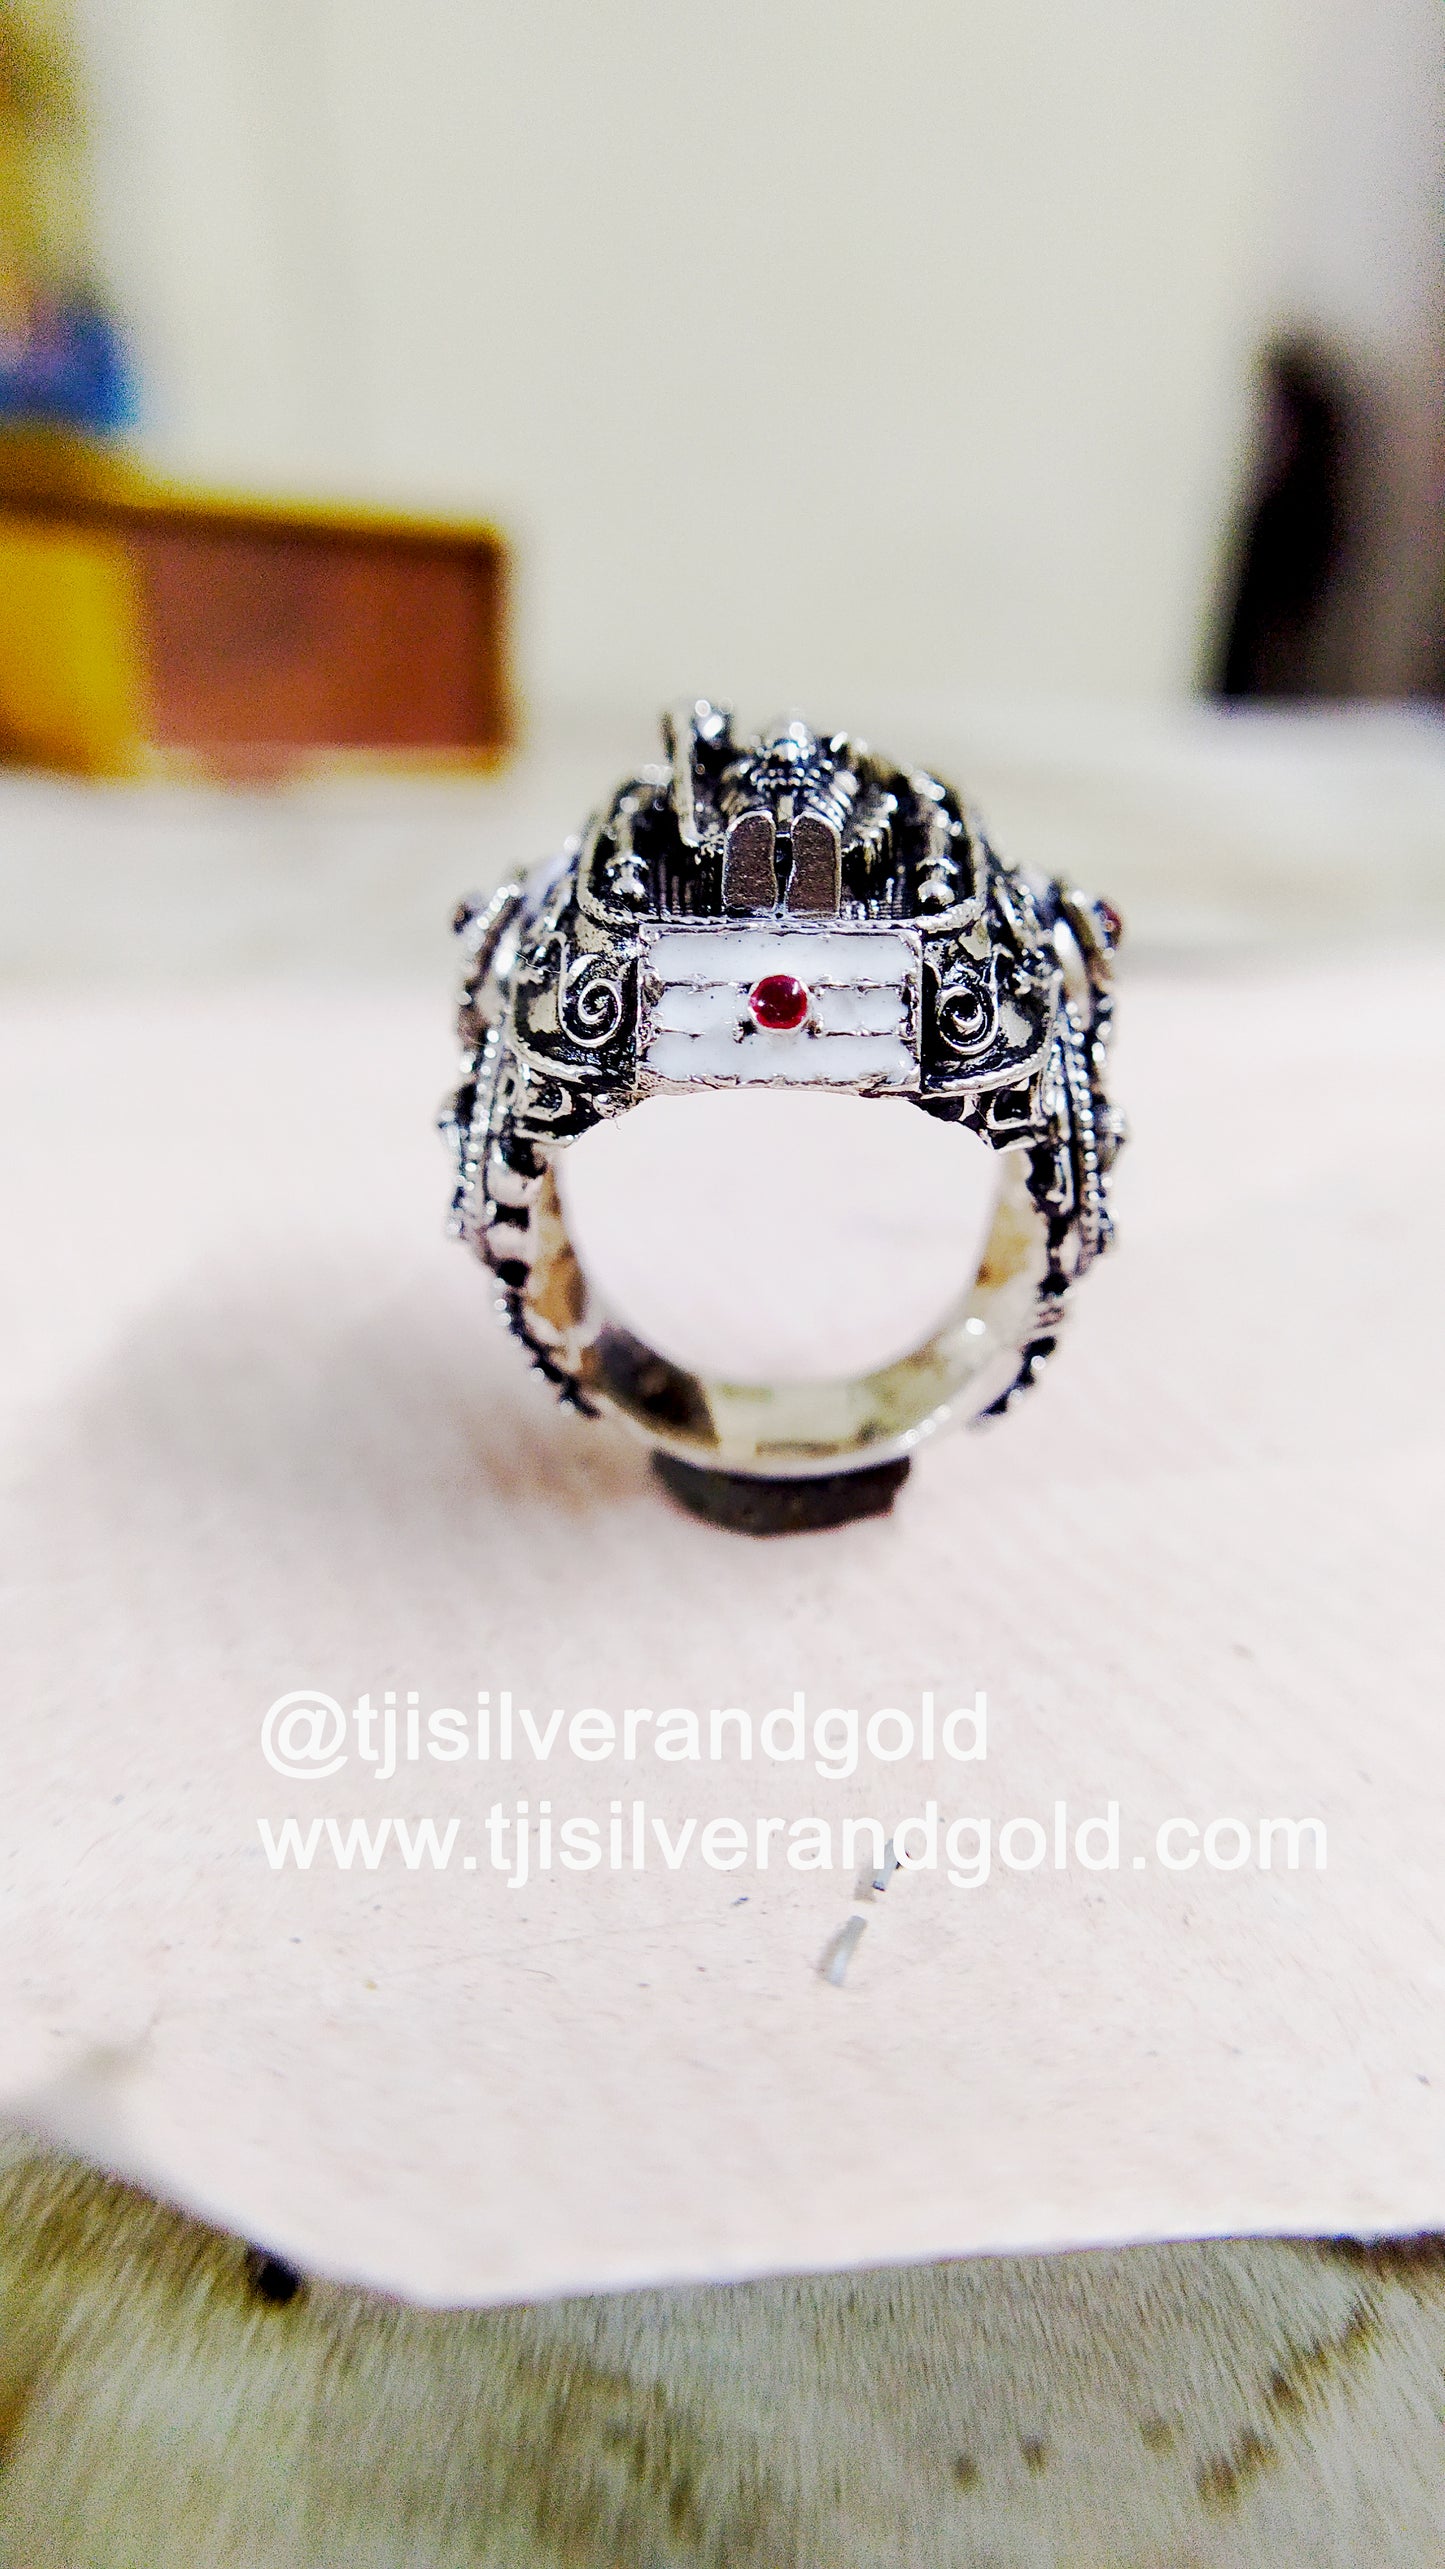 Murugar Ring|BigSize| with high octane antique finish sterling silver 925 with enamel